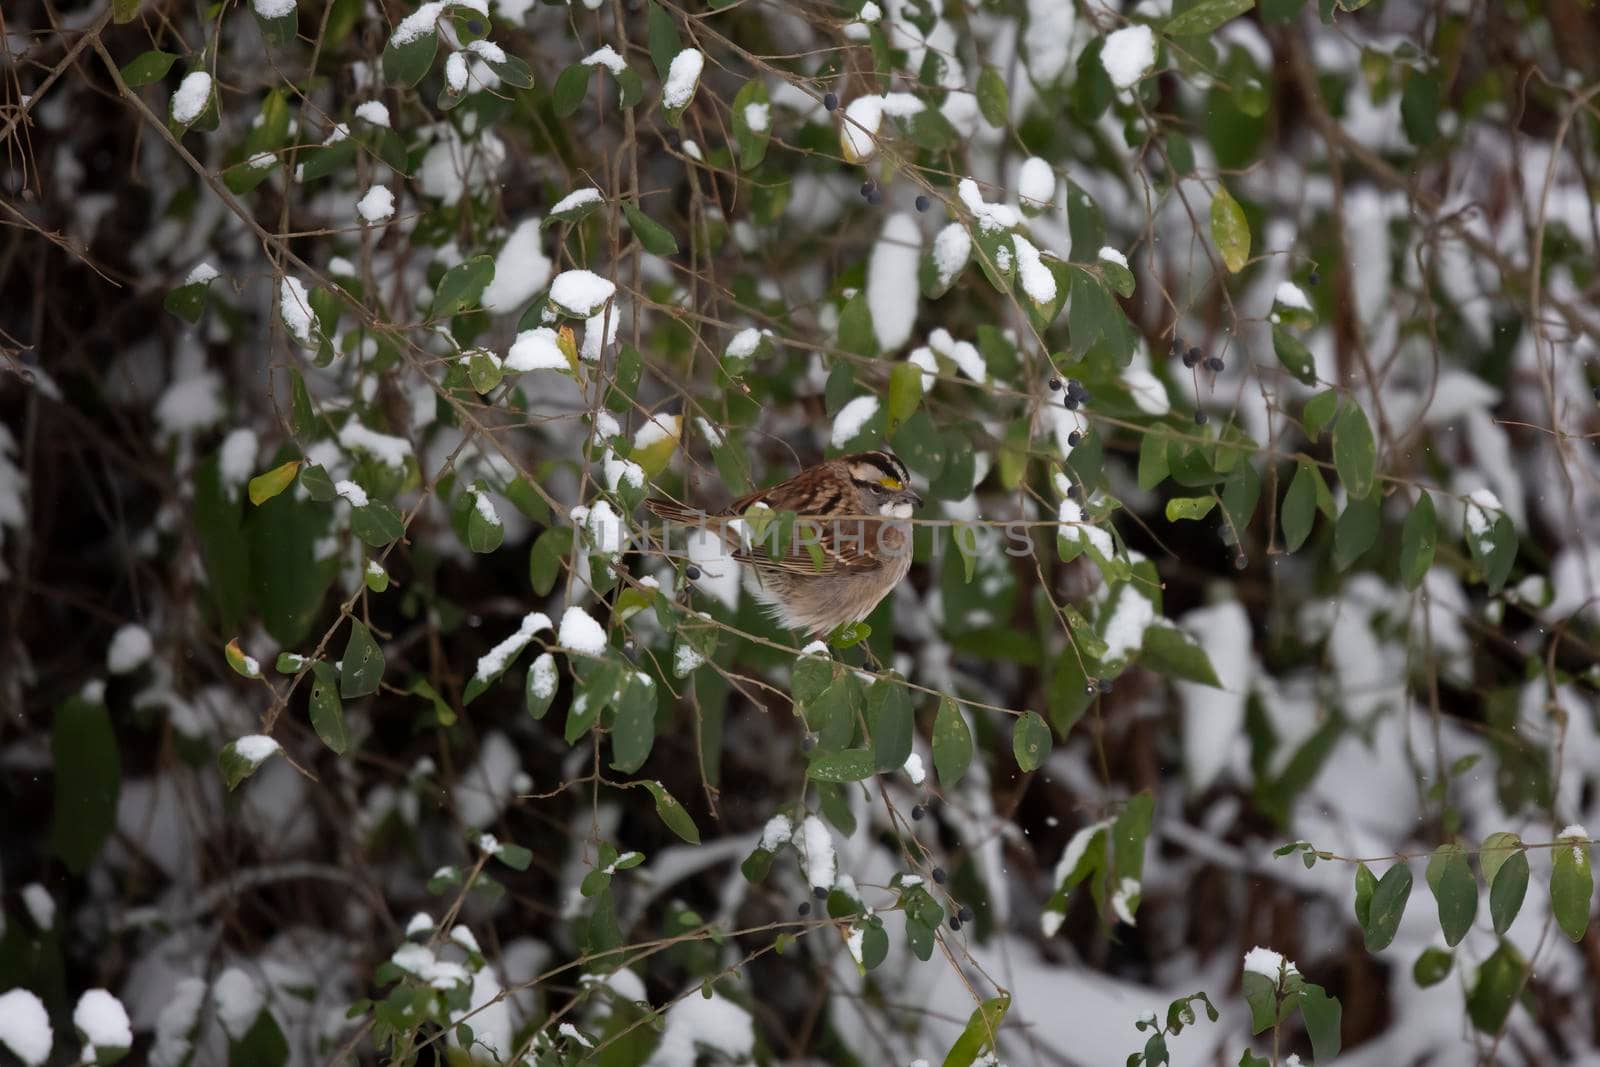 White-throated sparrow (Zonotrichia albicollis) foraging for purple berries on a snow-covered bush